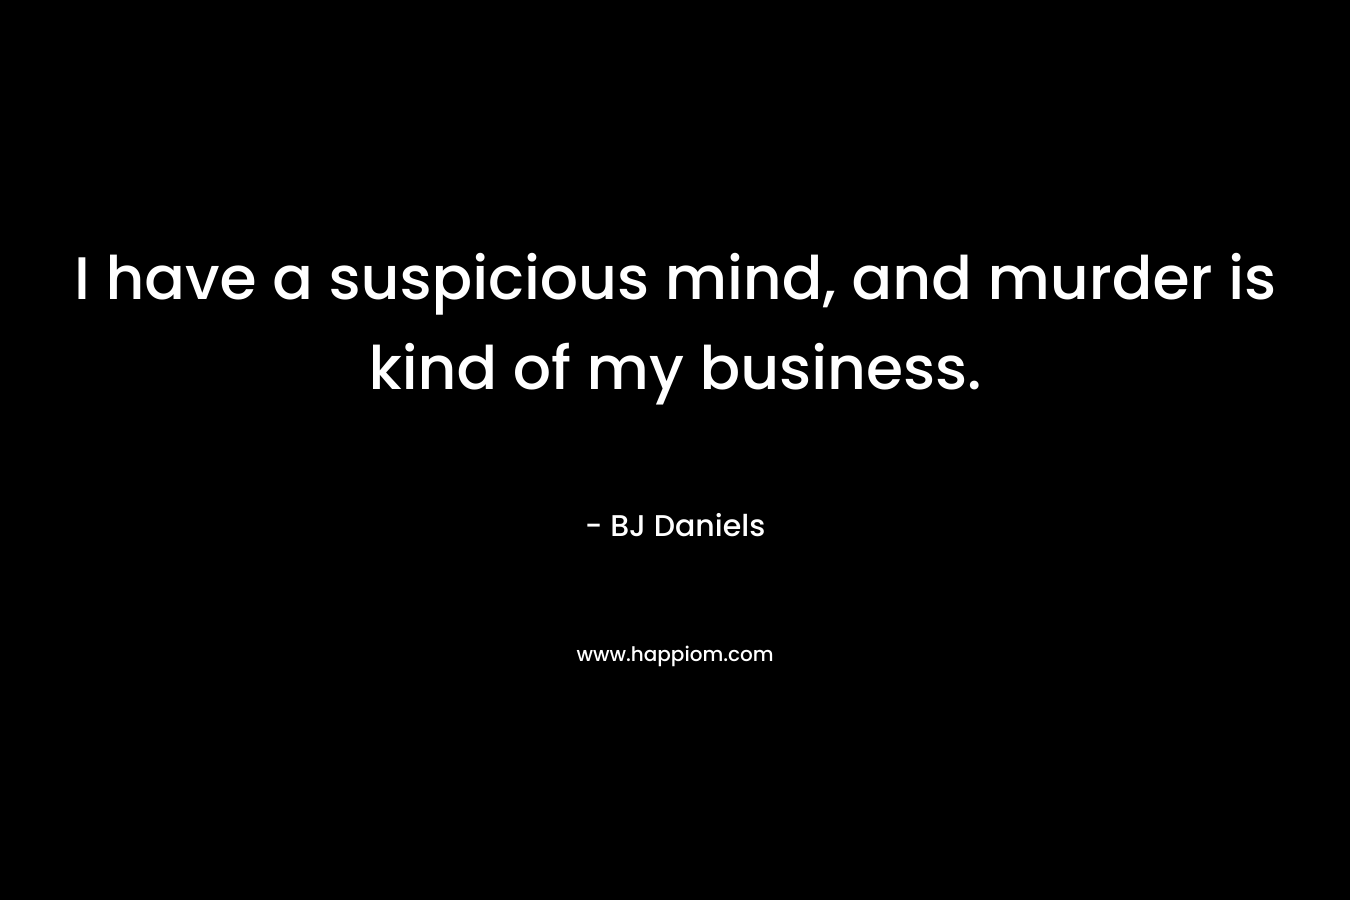 I have a suspicious mind, and murder is kind of my business. – BJ Daniels